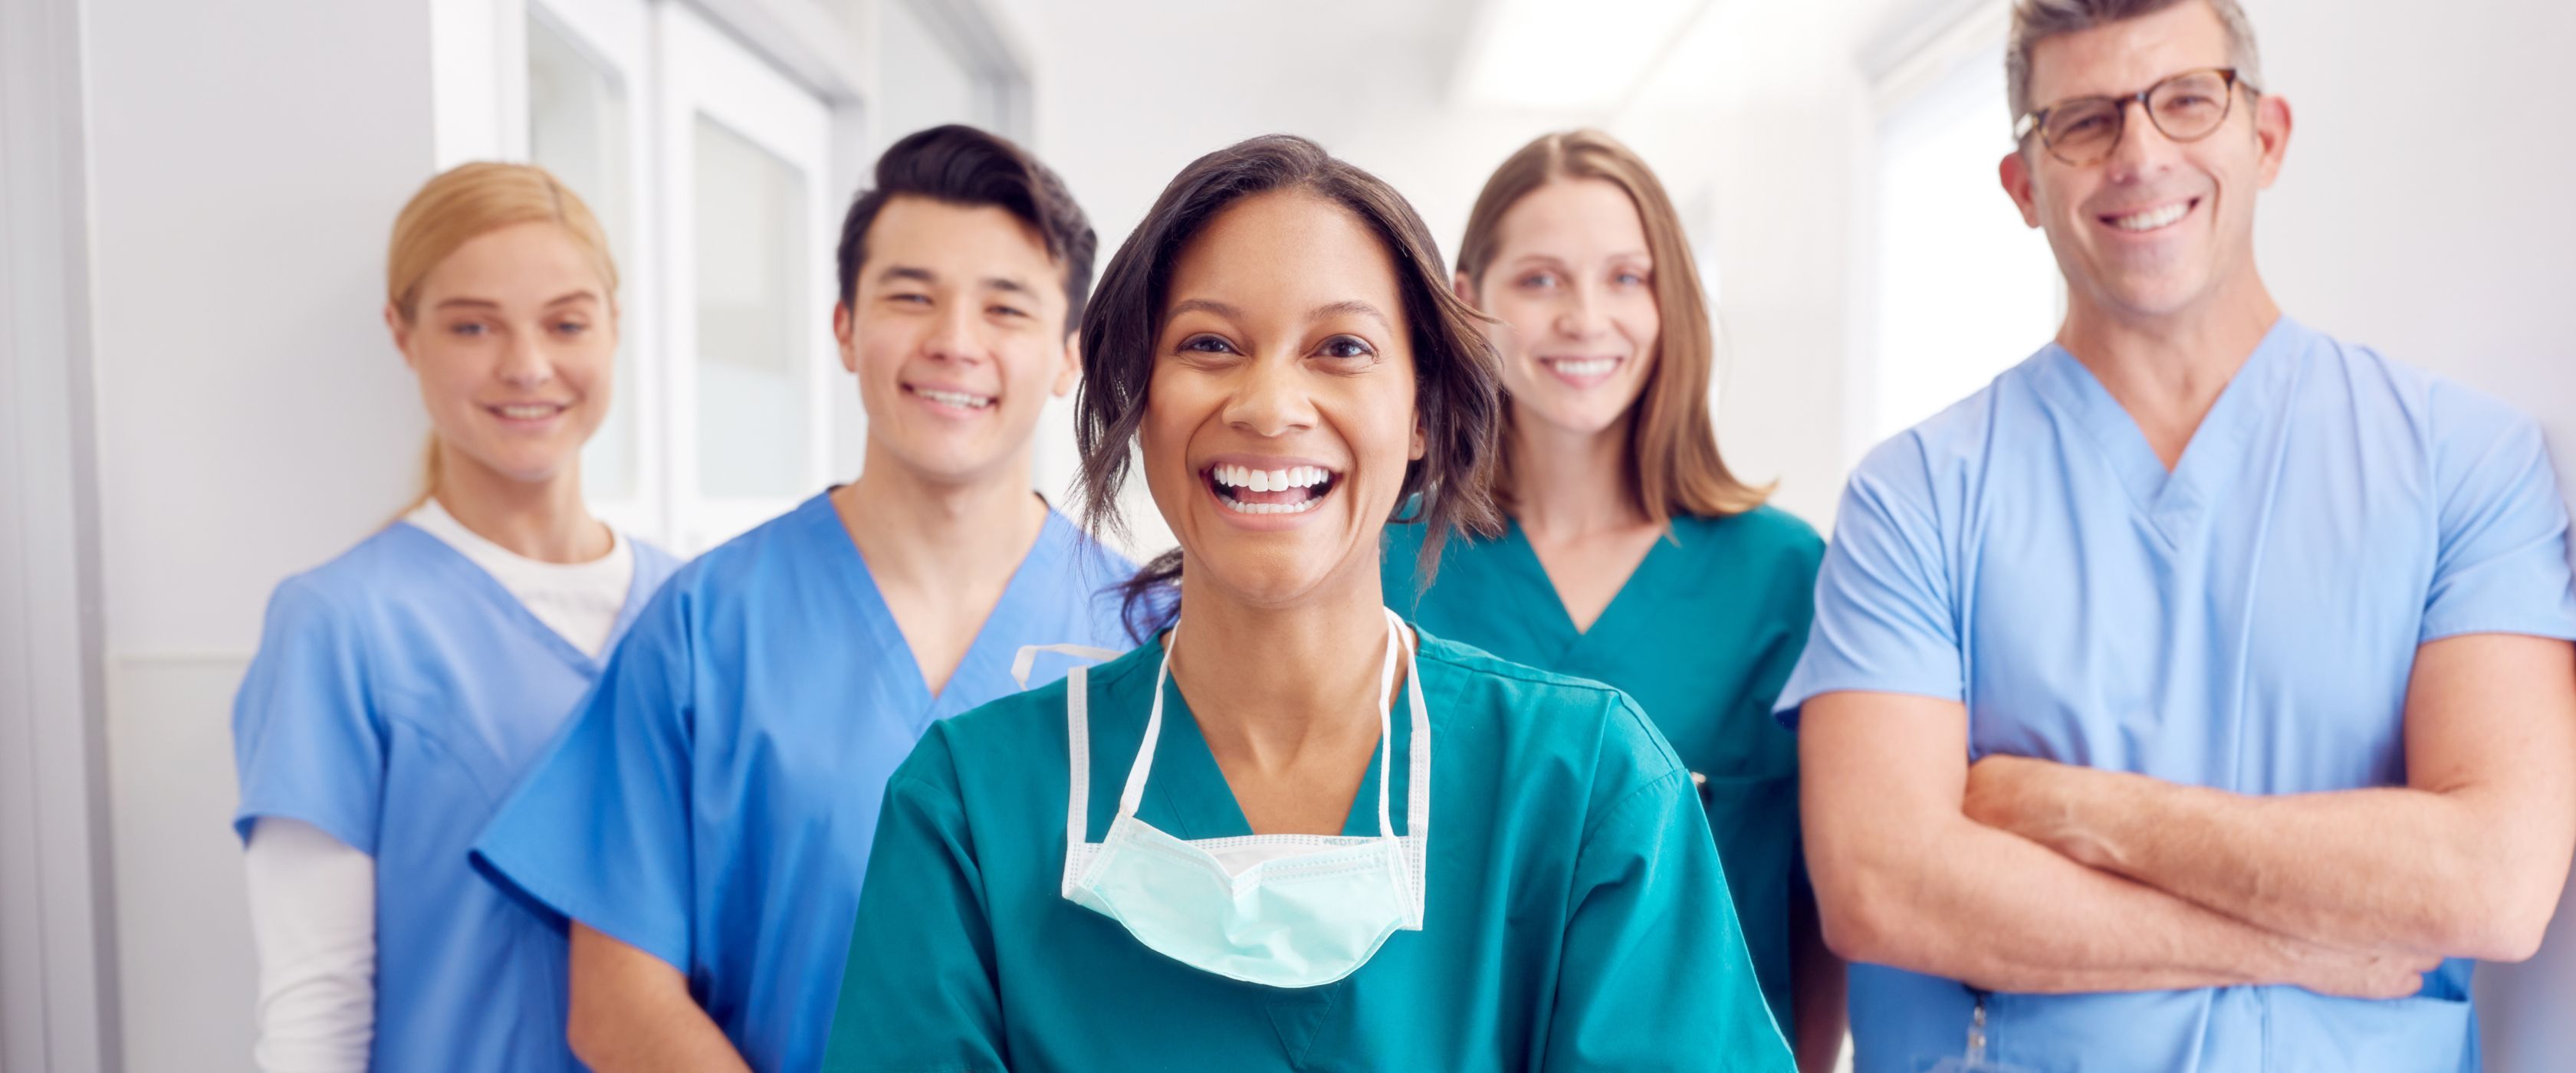 7 Truths About Nurses Week Blog - group of happy and smiling nurses